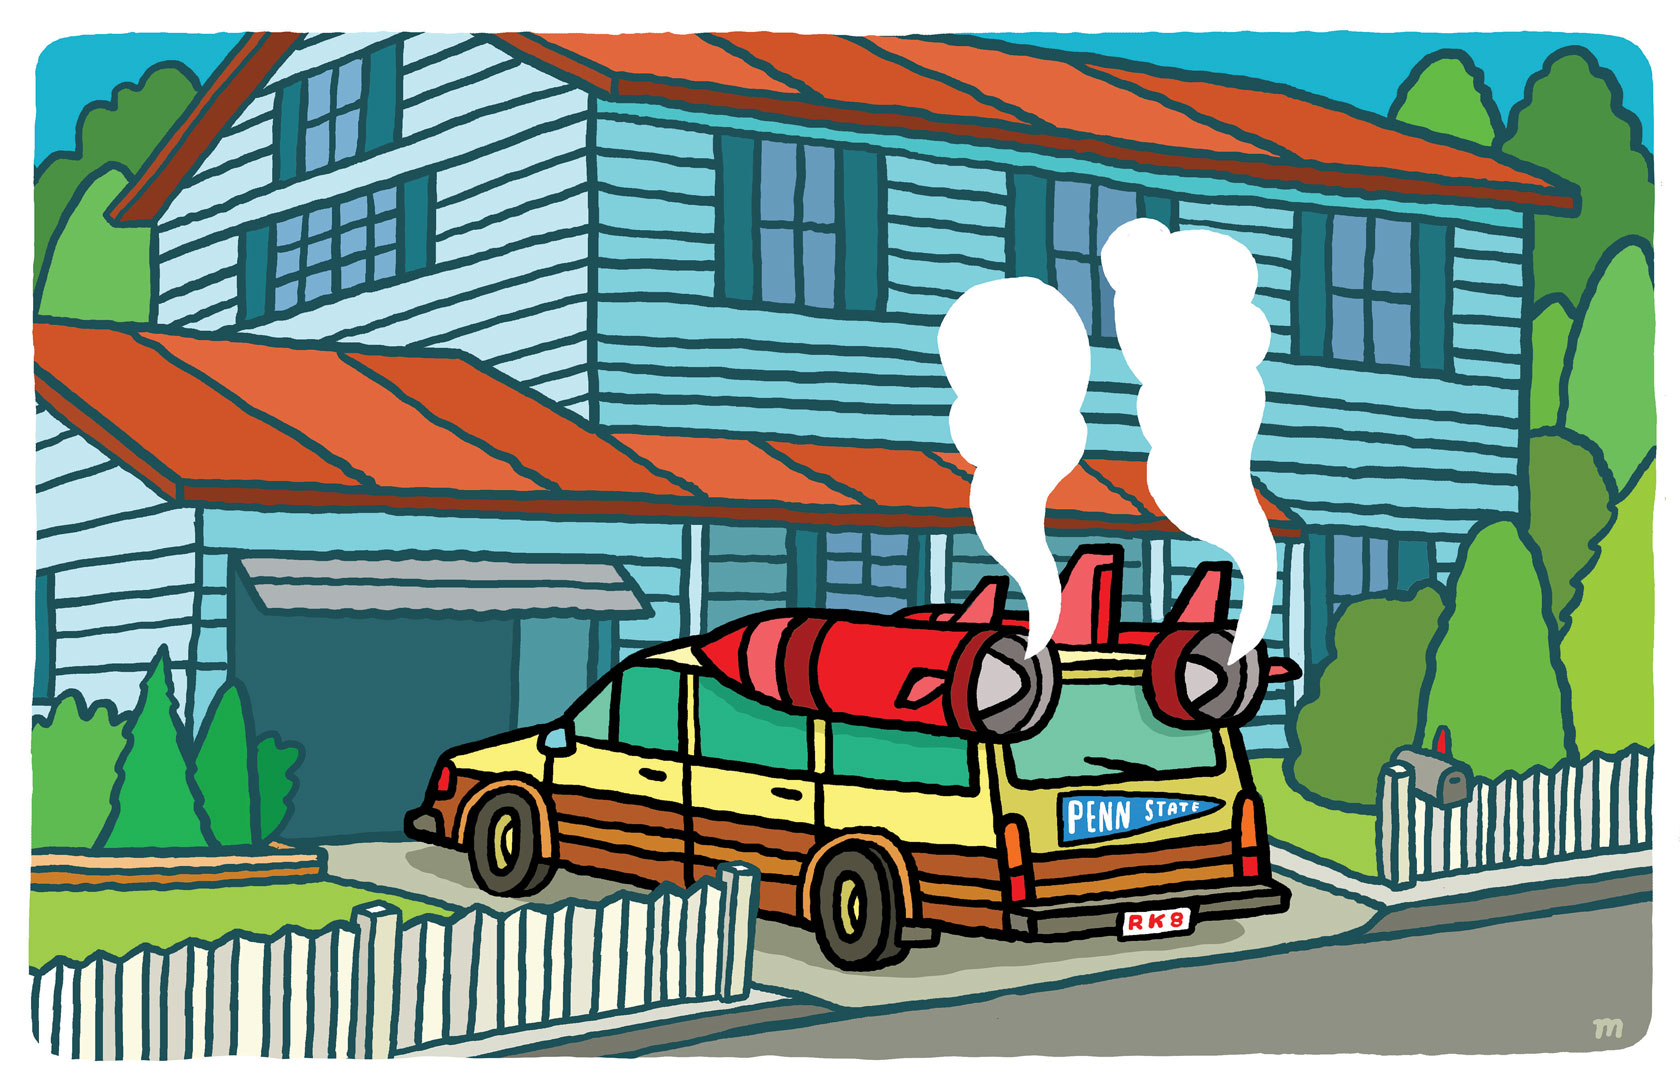 illustration of a car with smoking rockets attached parked in front of a house, by Aaron Meshon